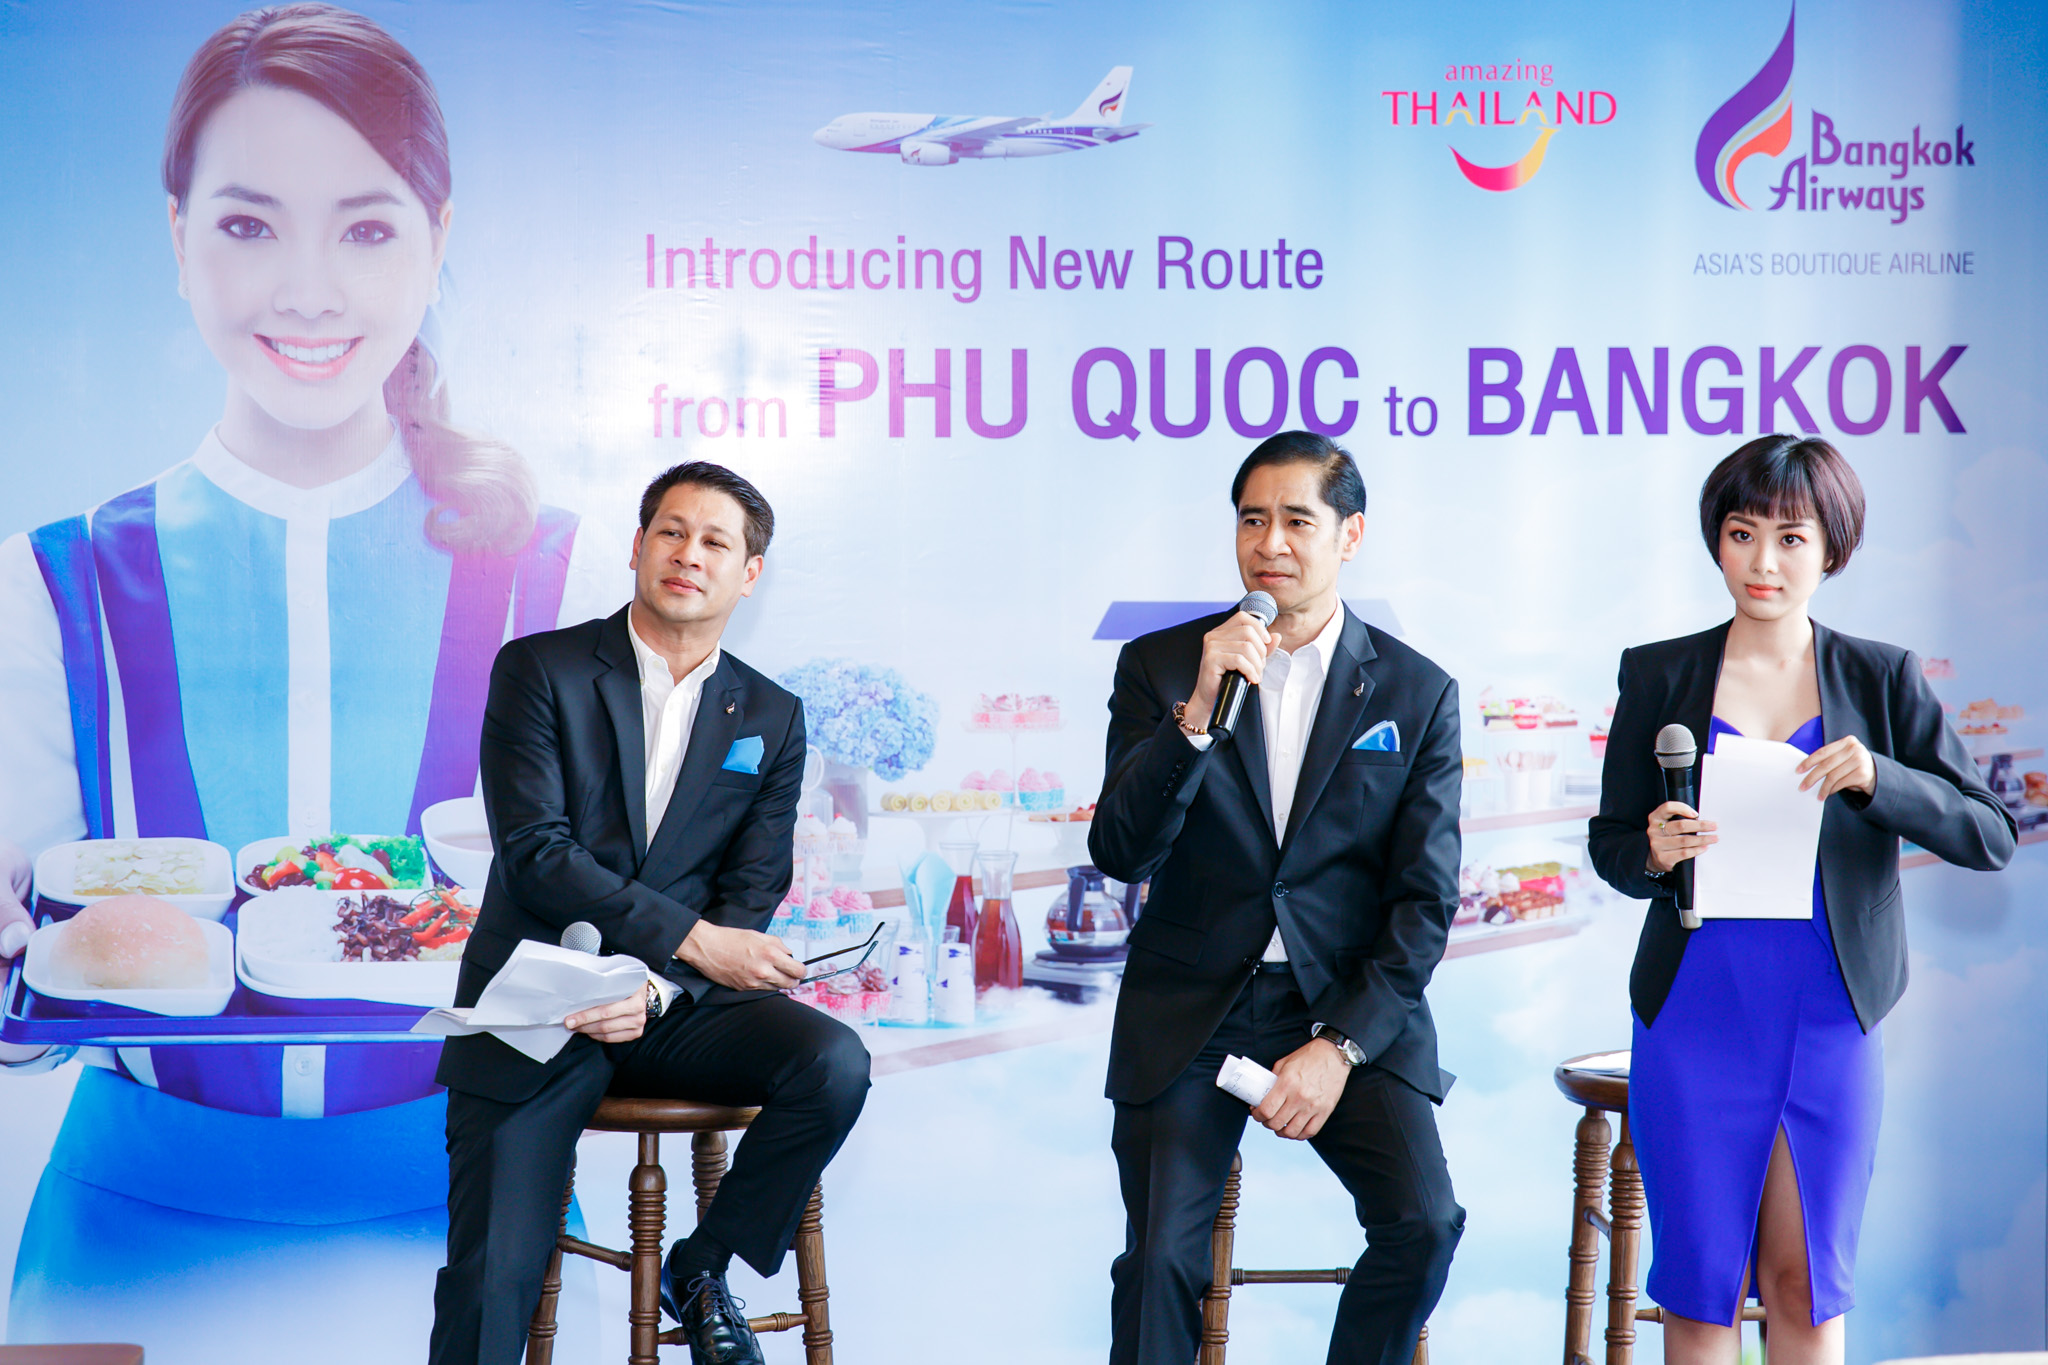 bangkok airways to launch the new direct route between phu quoc and bangkok